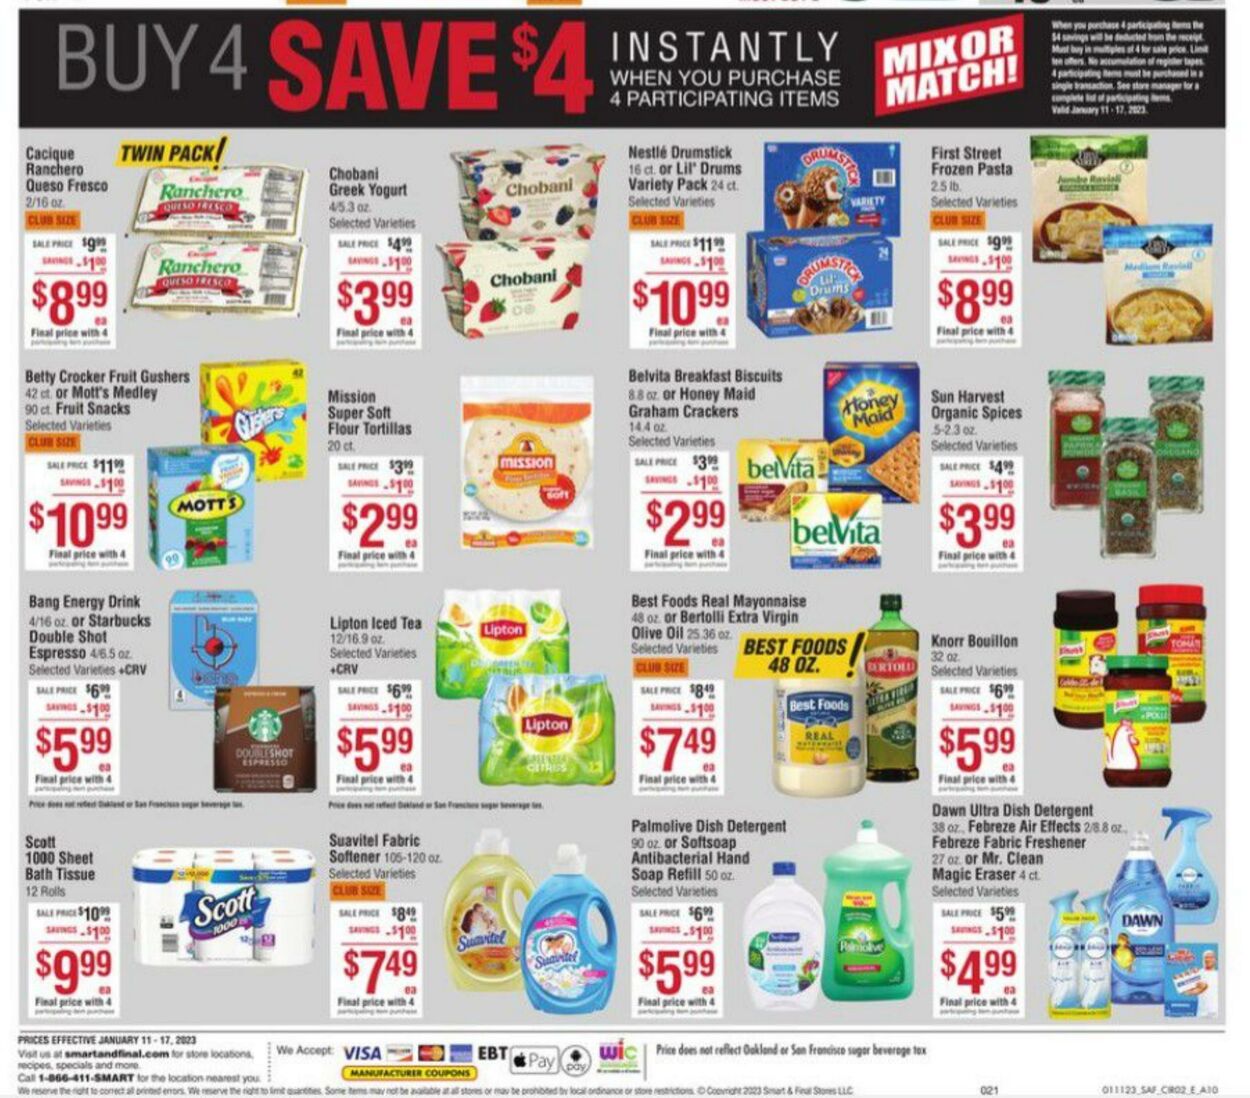 Weekly ad Smart and Final 01/11/2023 - 01/17/2023